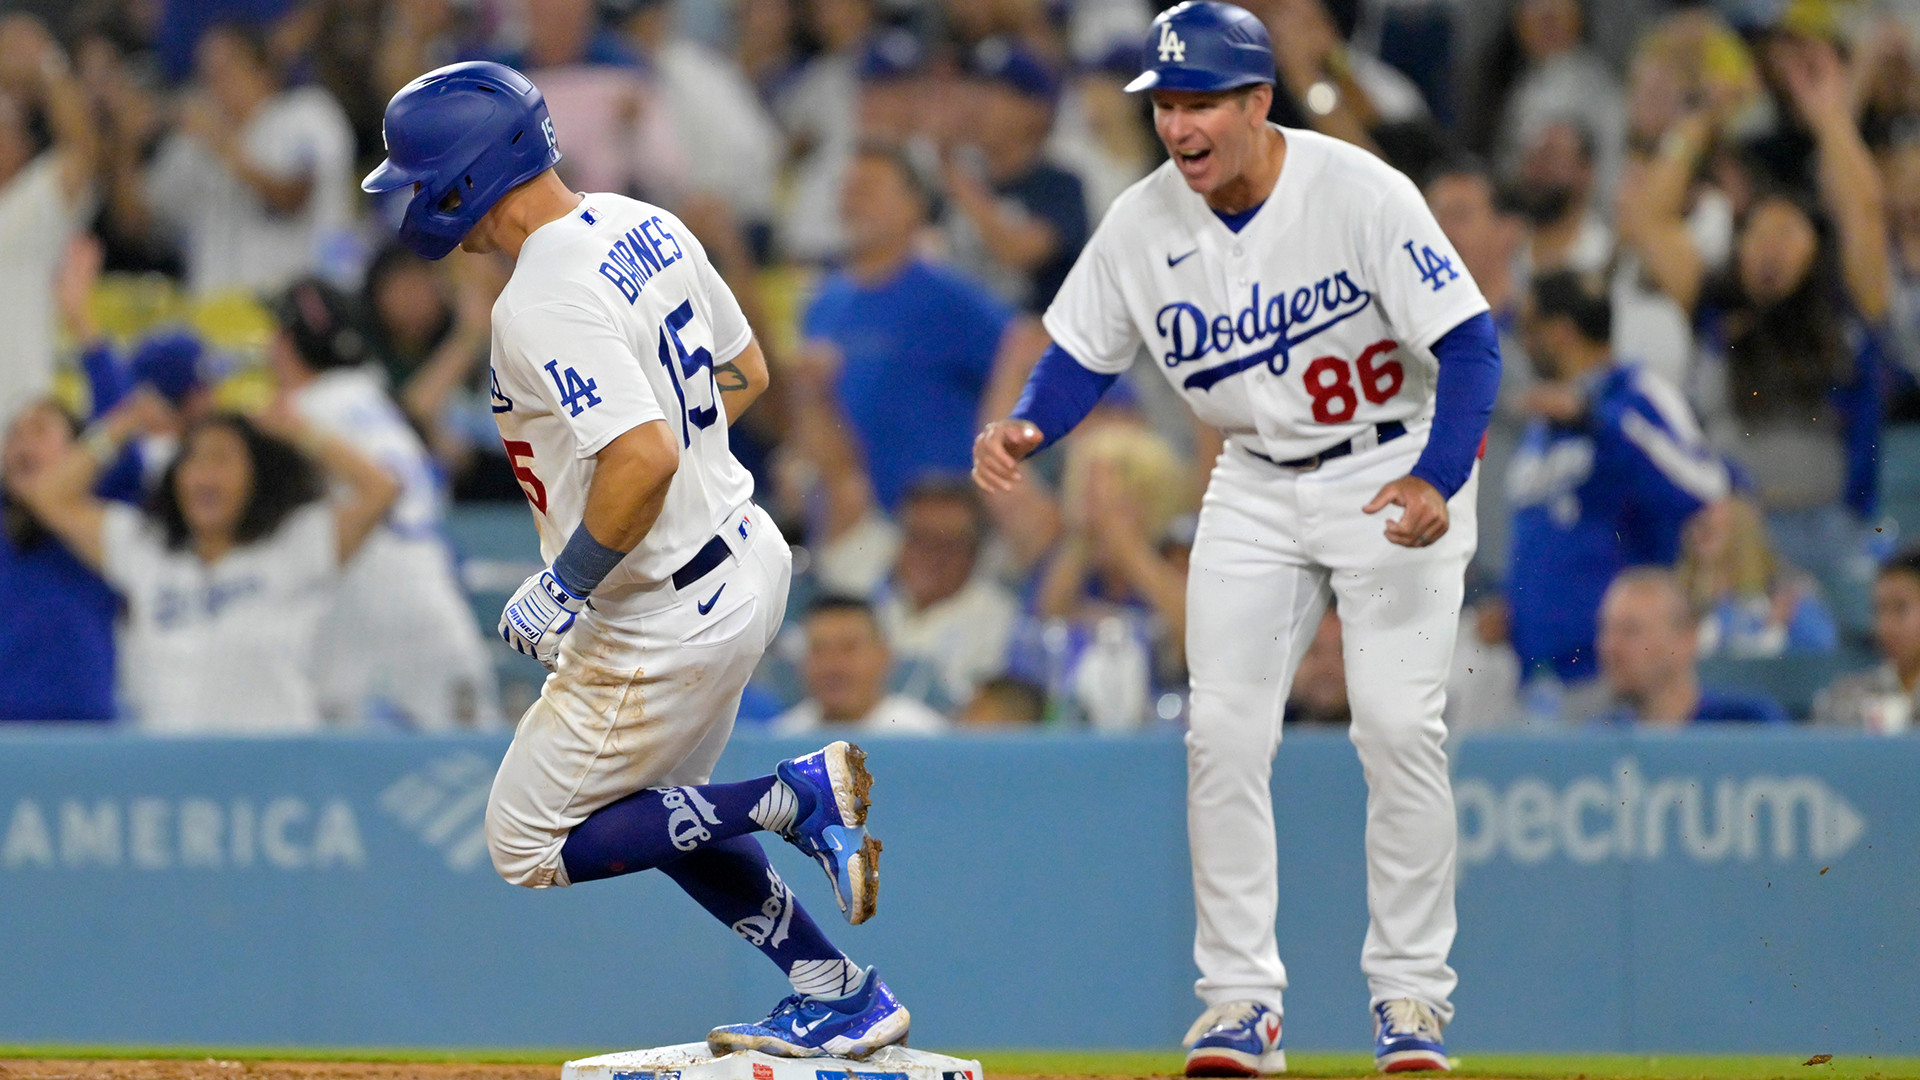 Austin Barnes extends Dodgers' win streak to 11 games - Sports Illustrated